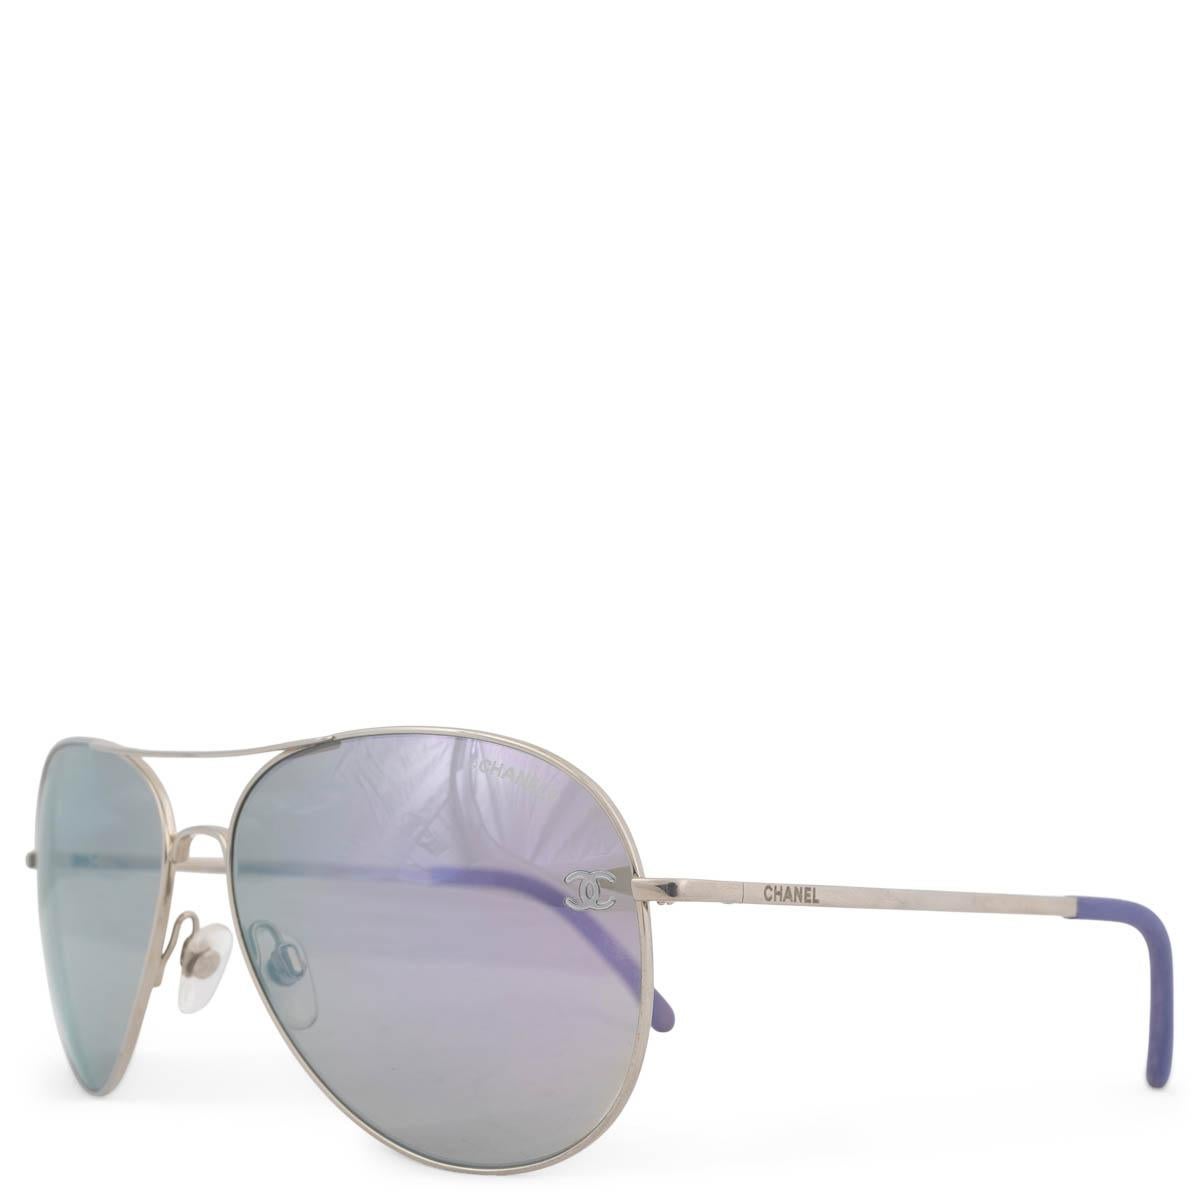 100% authentic Chanel 4189 pilot sunglasses with chrome lenses and a light tone titanium frame. Features calf skin details in lavender on the handle-ends. Has been worn and is in excellent condition. Has been worn and comes with case and